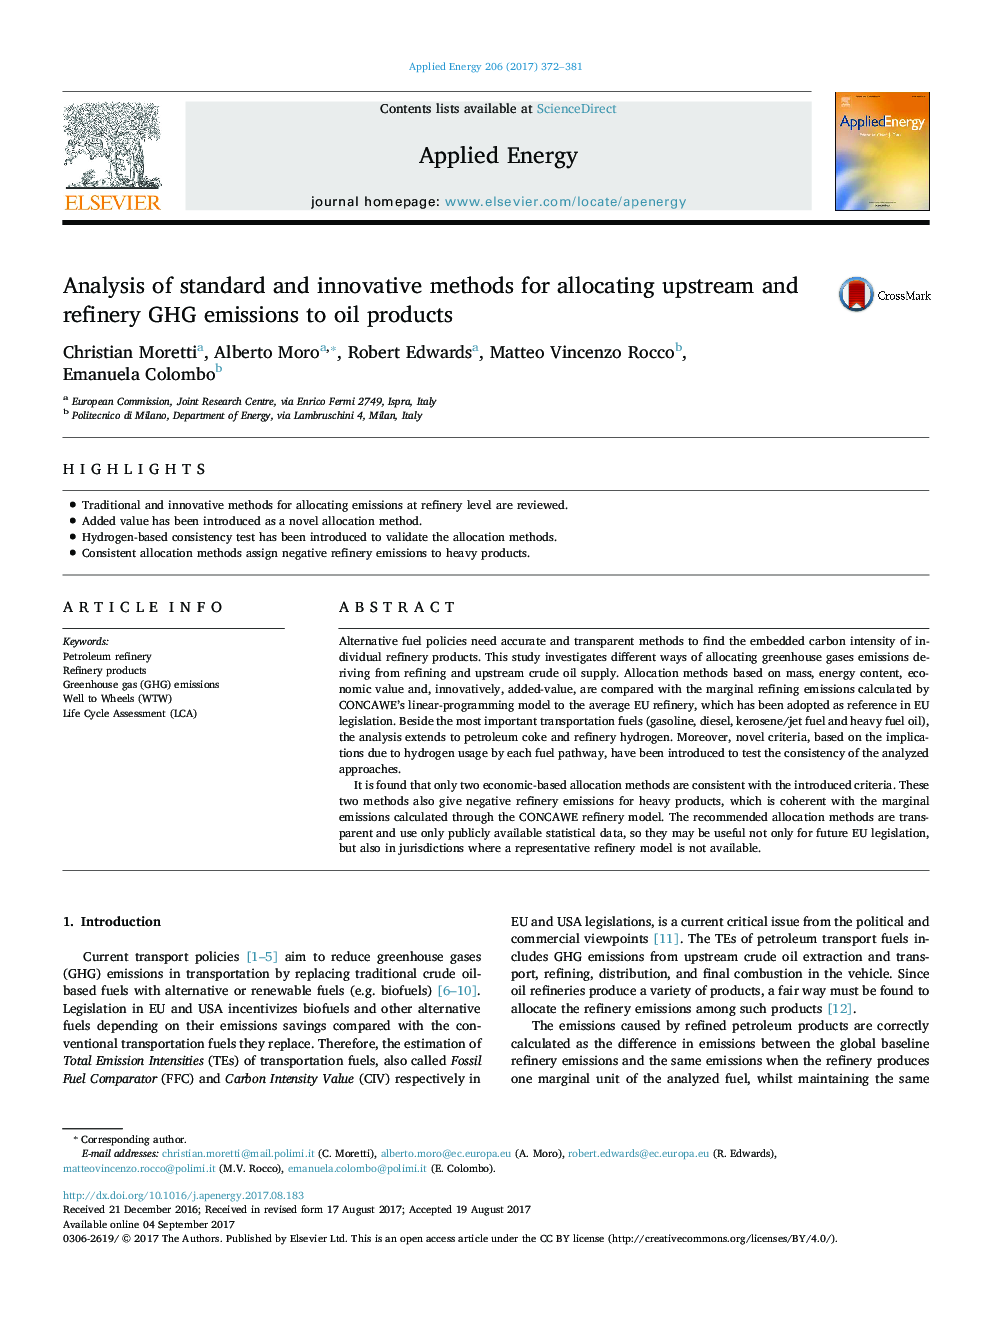 Analysis of standard and innovative methods for allocating upstream and refinery GHG emissions to oil products